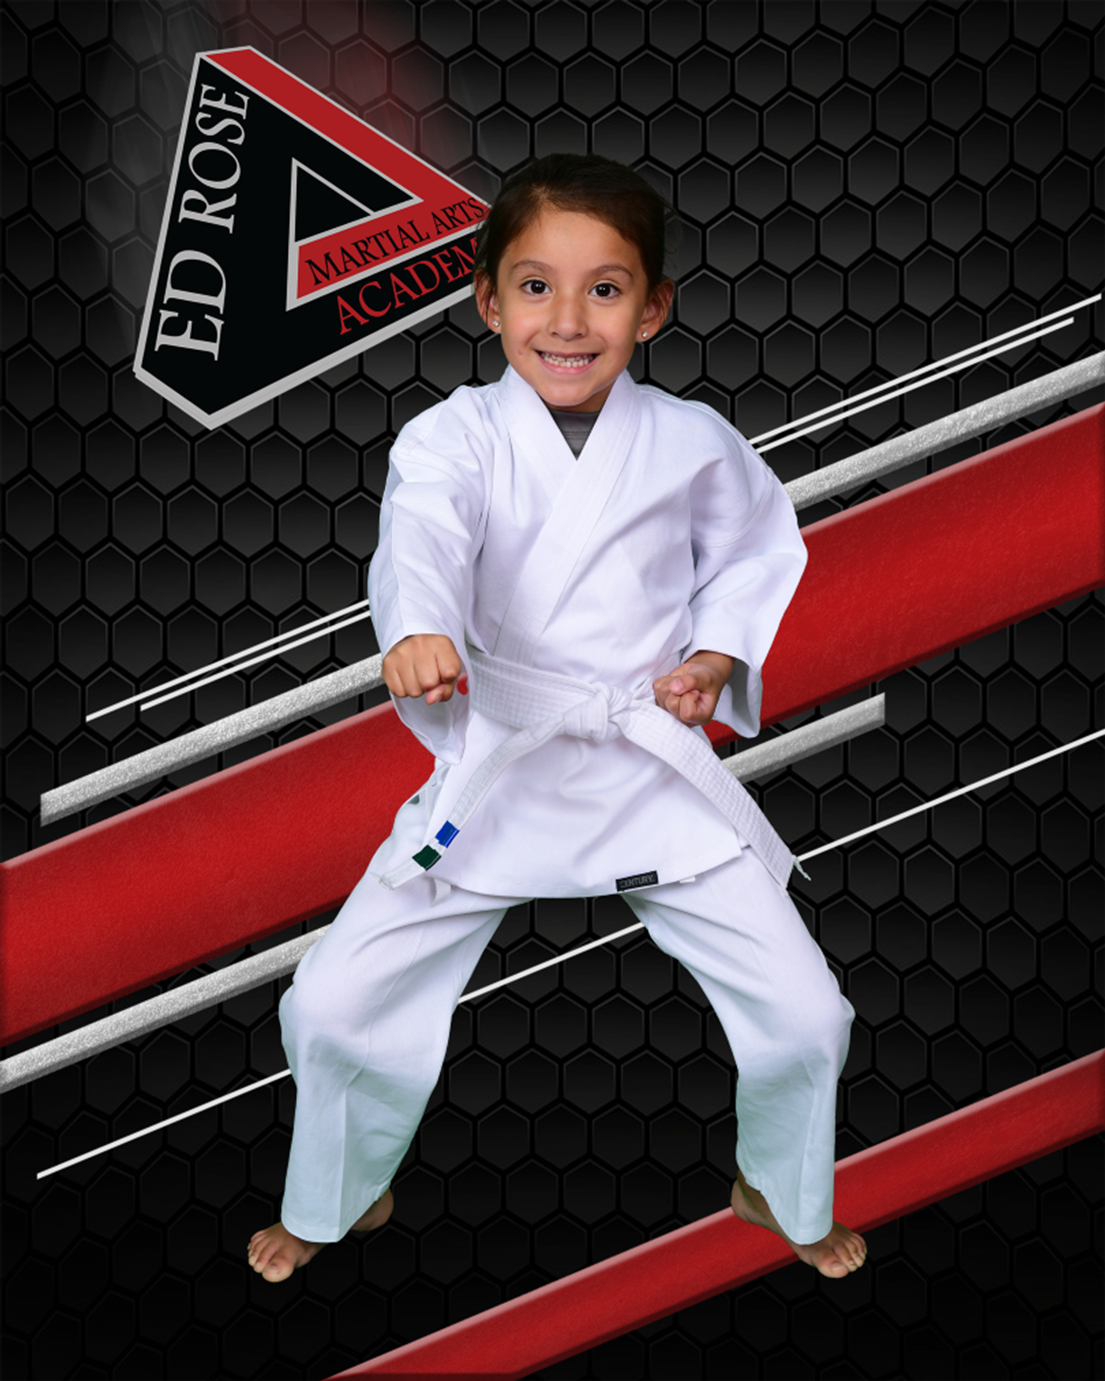 Ed Rose's Martial Arts Academy Special Offers